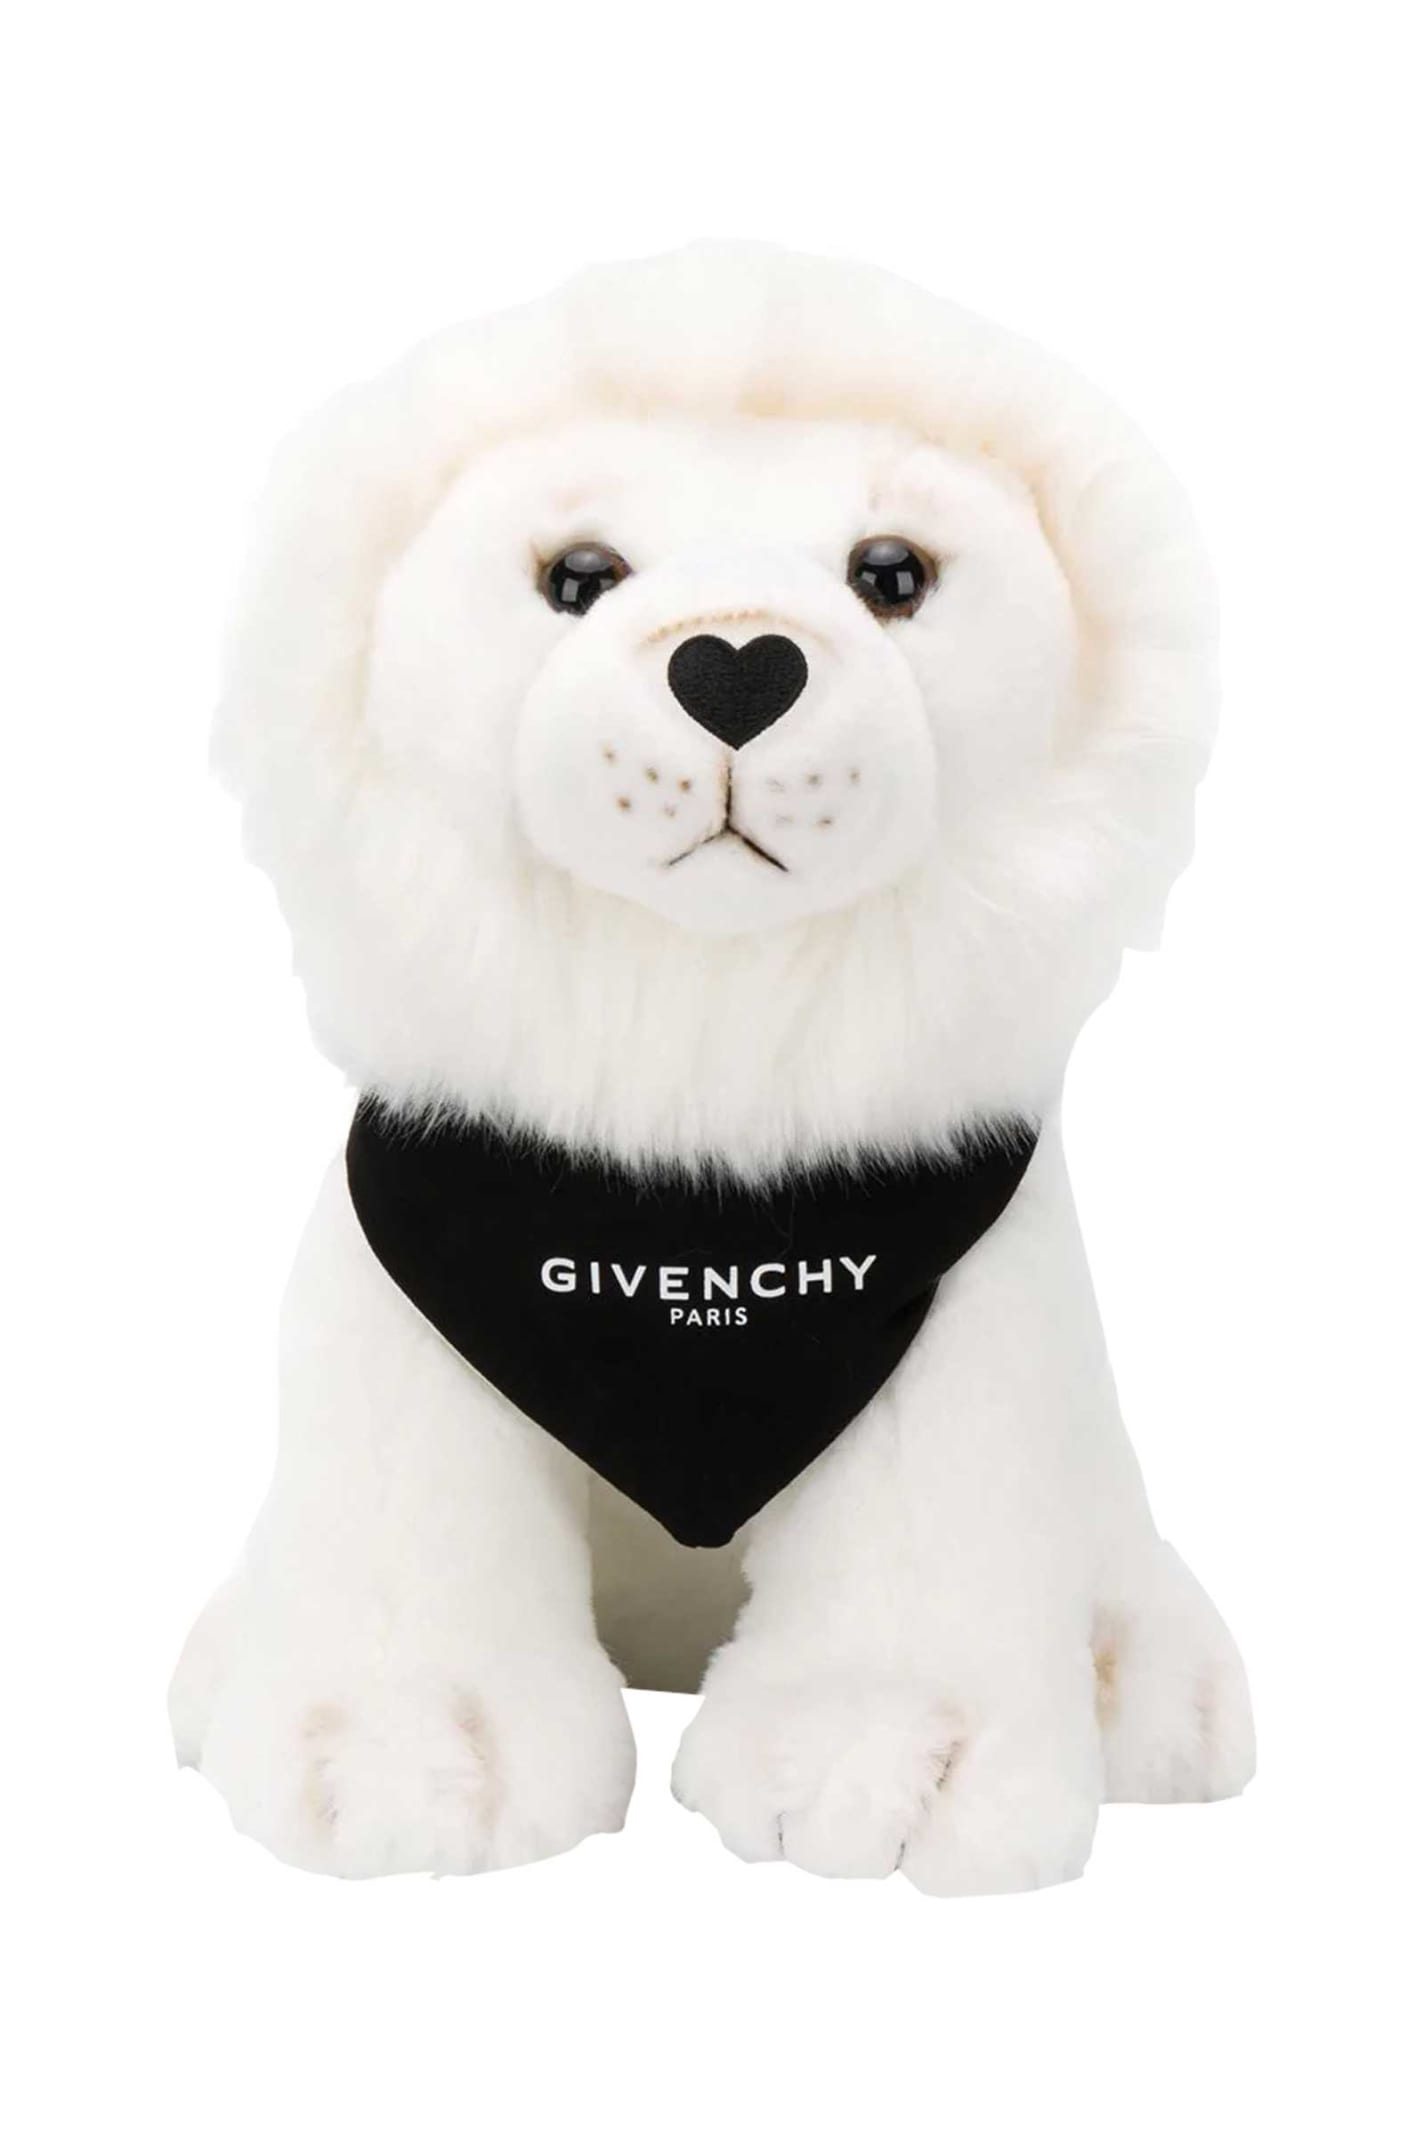 Image of Givenchy